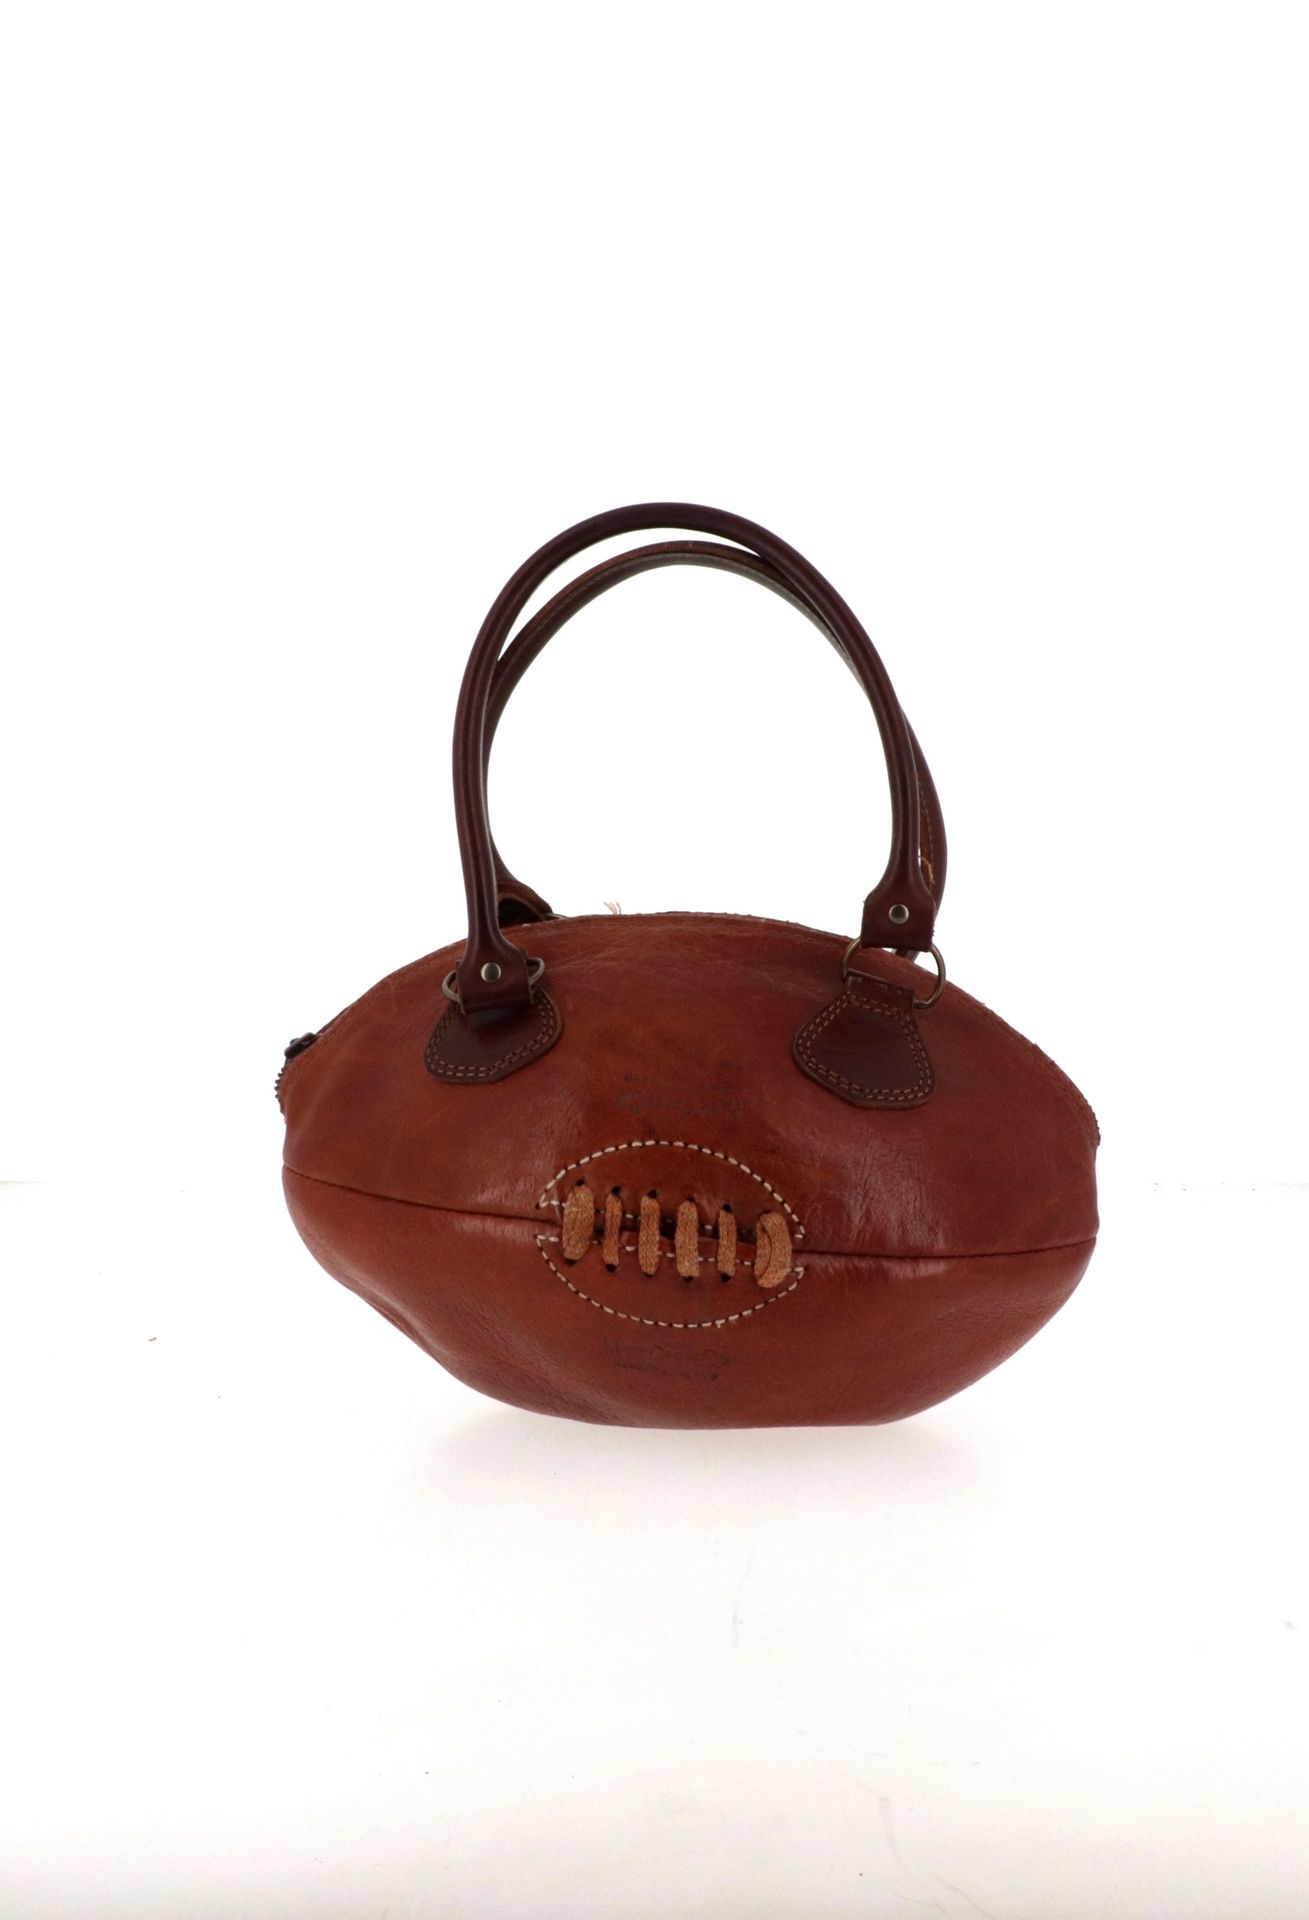 MAISON MARTIN MARGIELA Rugby ball" bag

in cognac leather, brass trimmings

Abou&hellip;